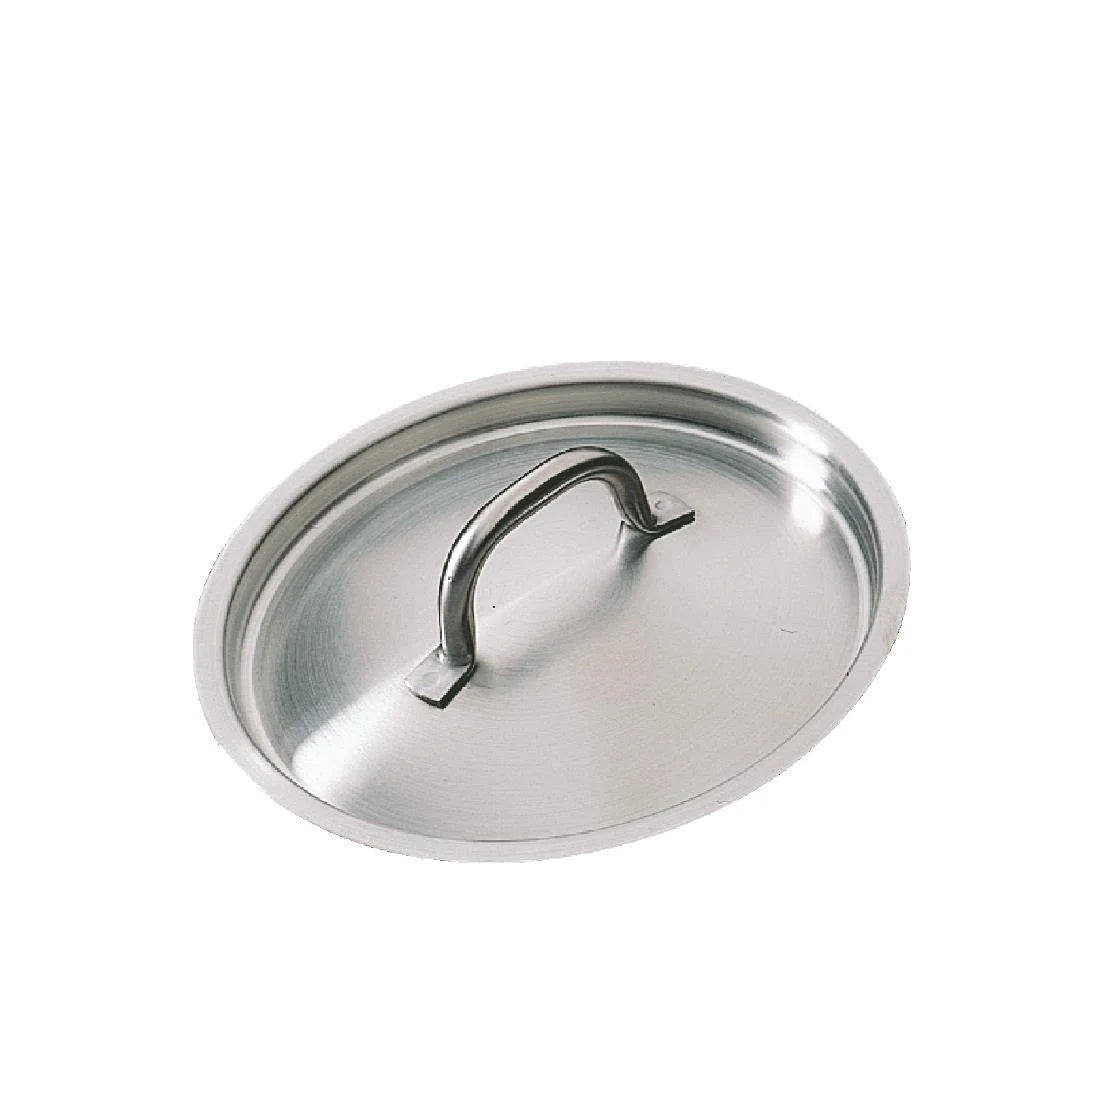 Bourgeat Stainless Steel Saucepan Lid 280mm JD Catering Equipment Solutions Ltd